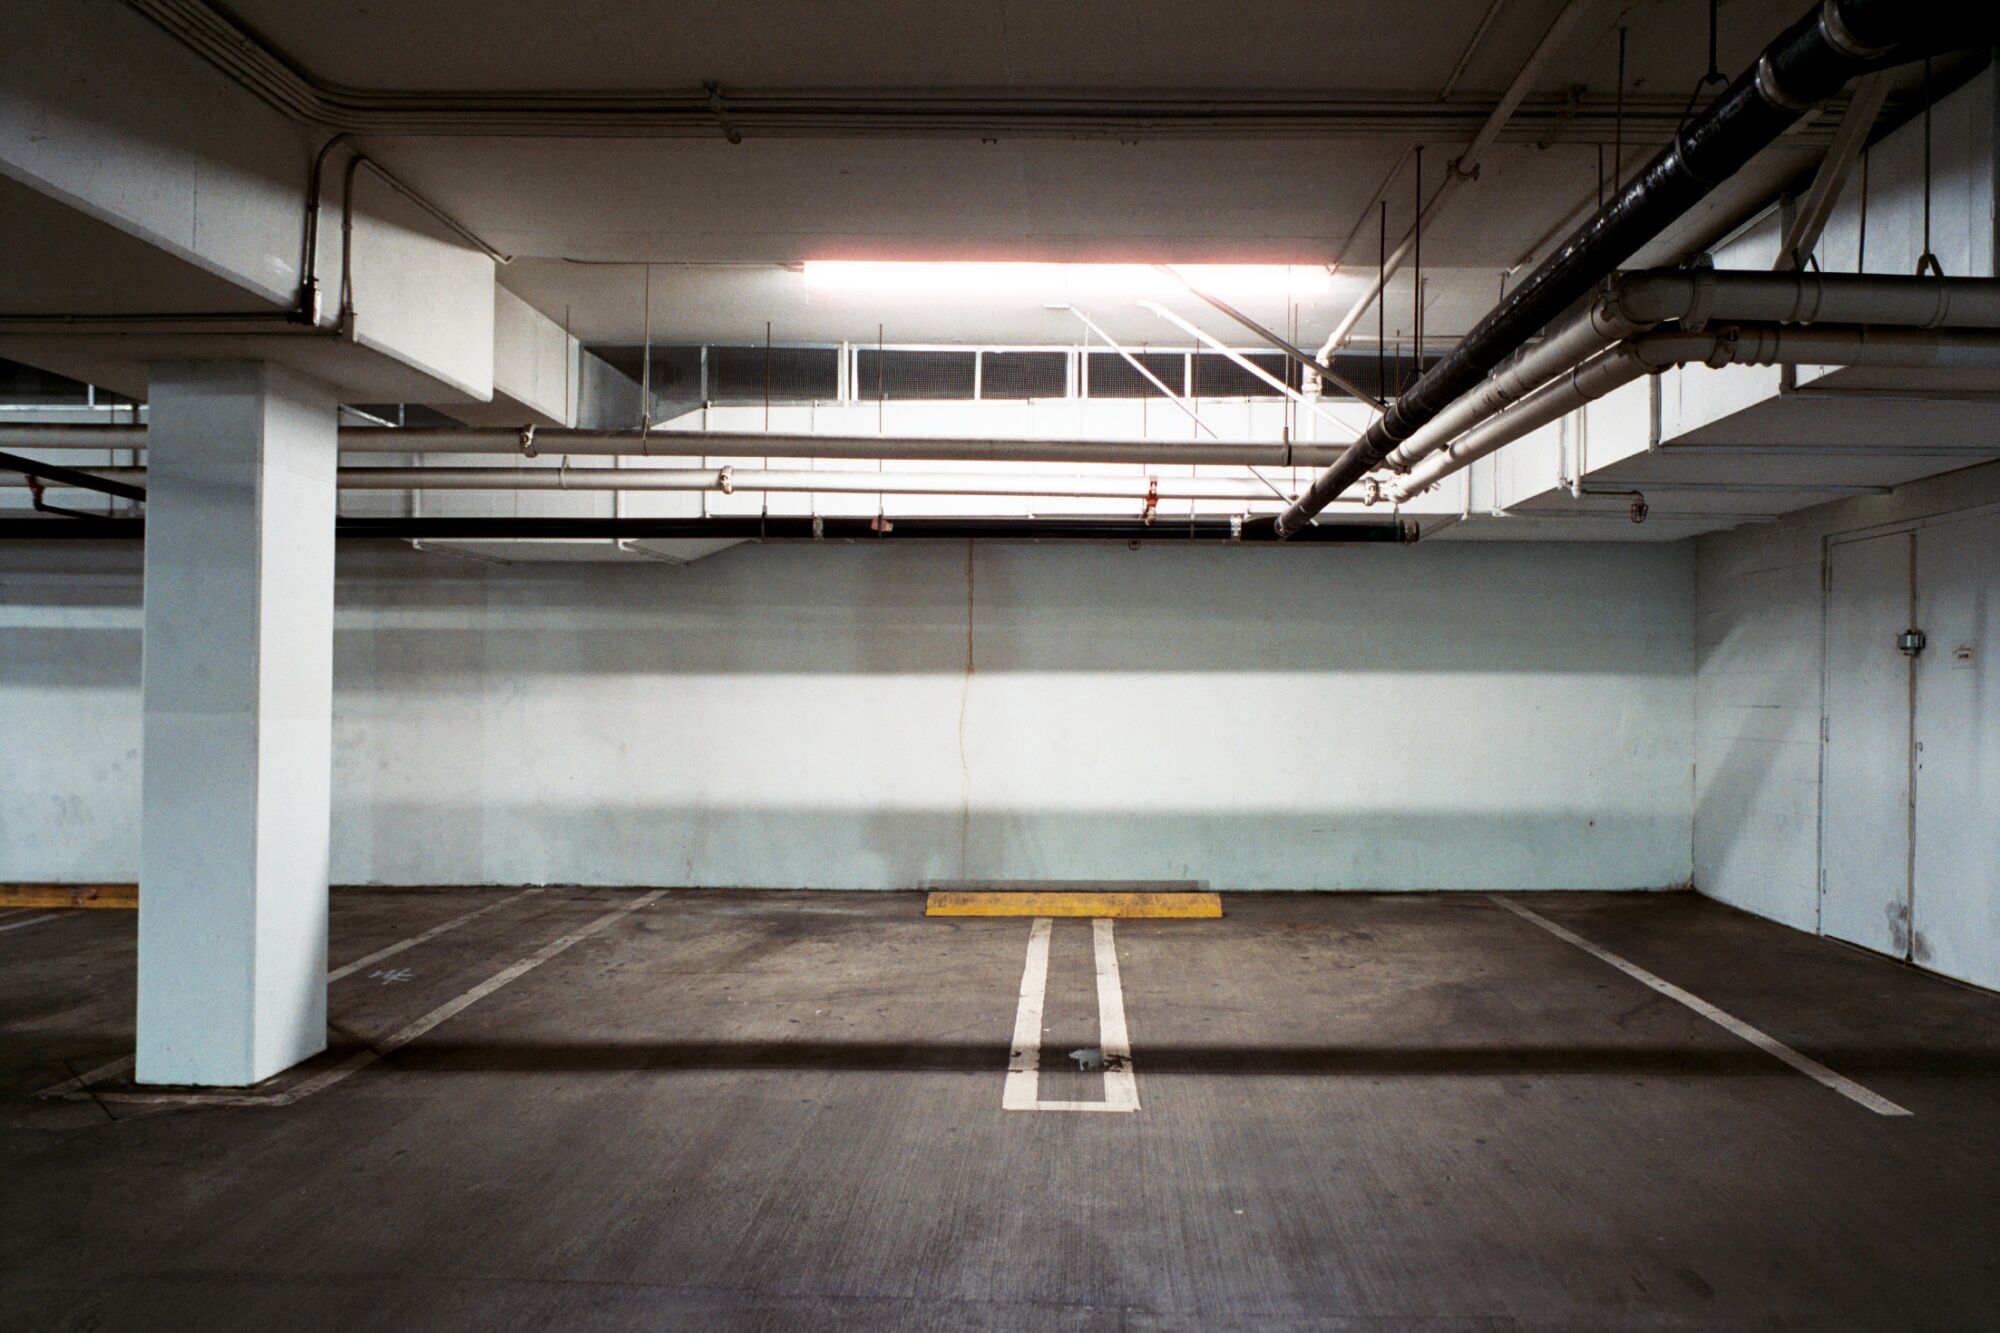 Two parking spaces illuminated with fluorescent light